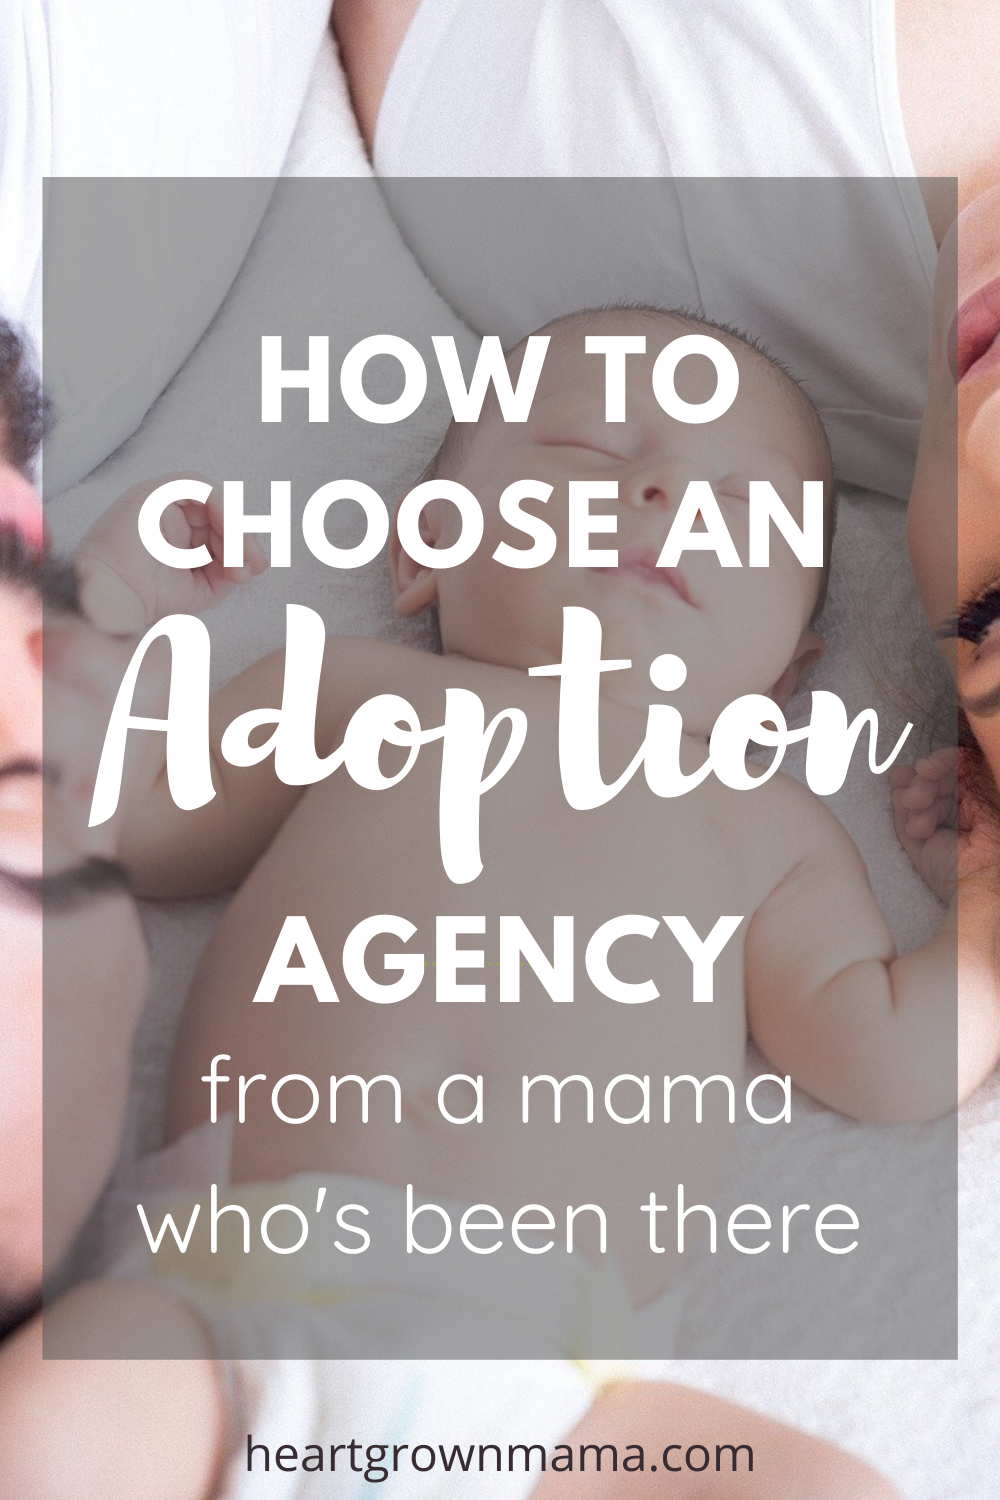 How to choose an adoption agency